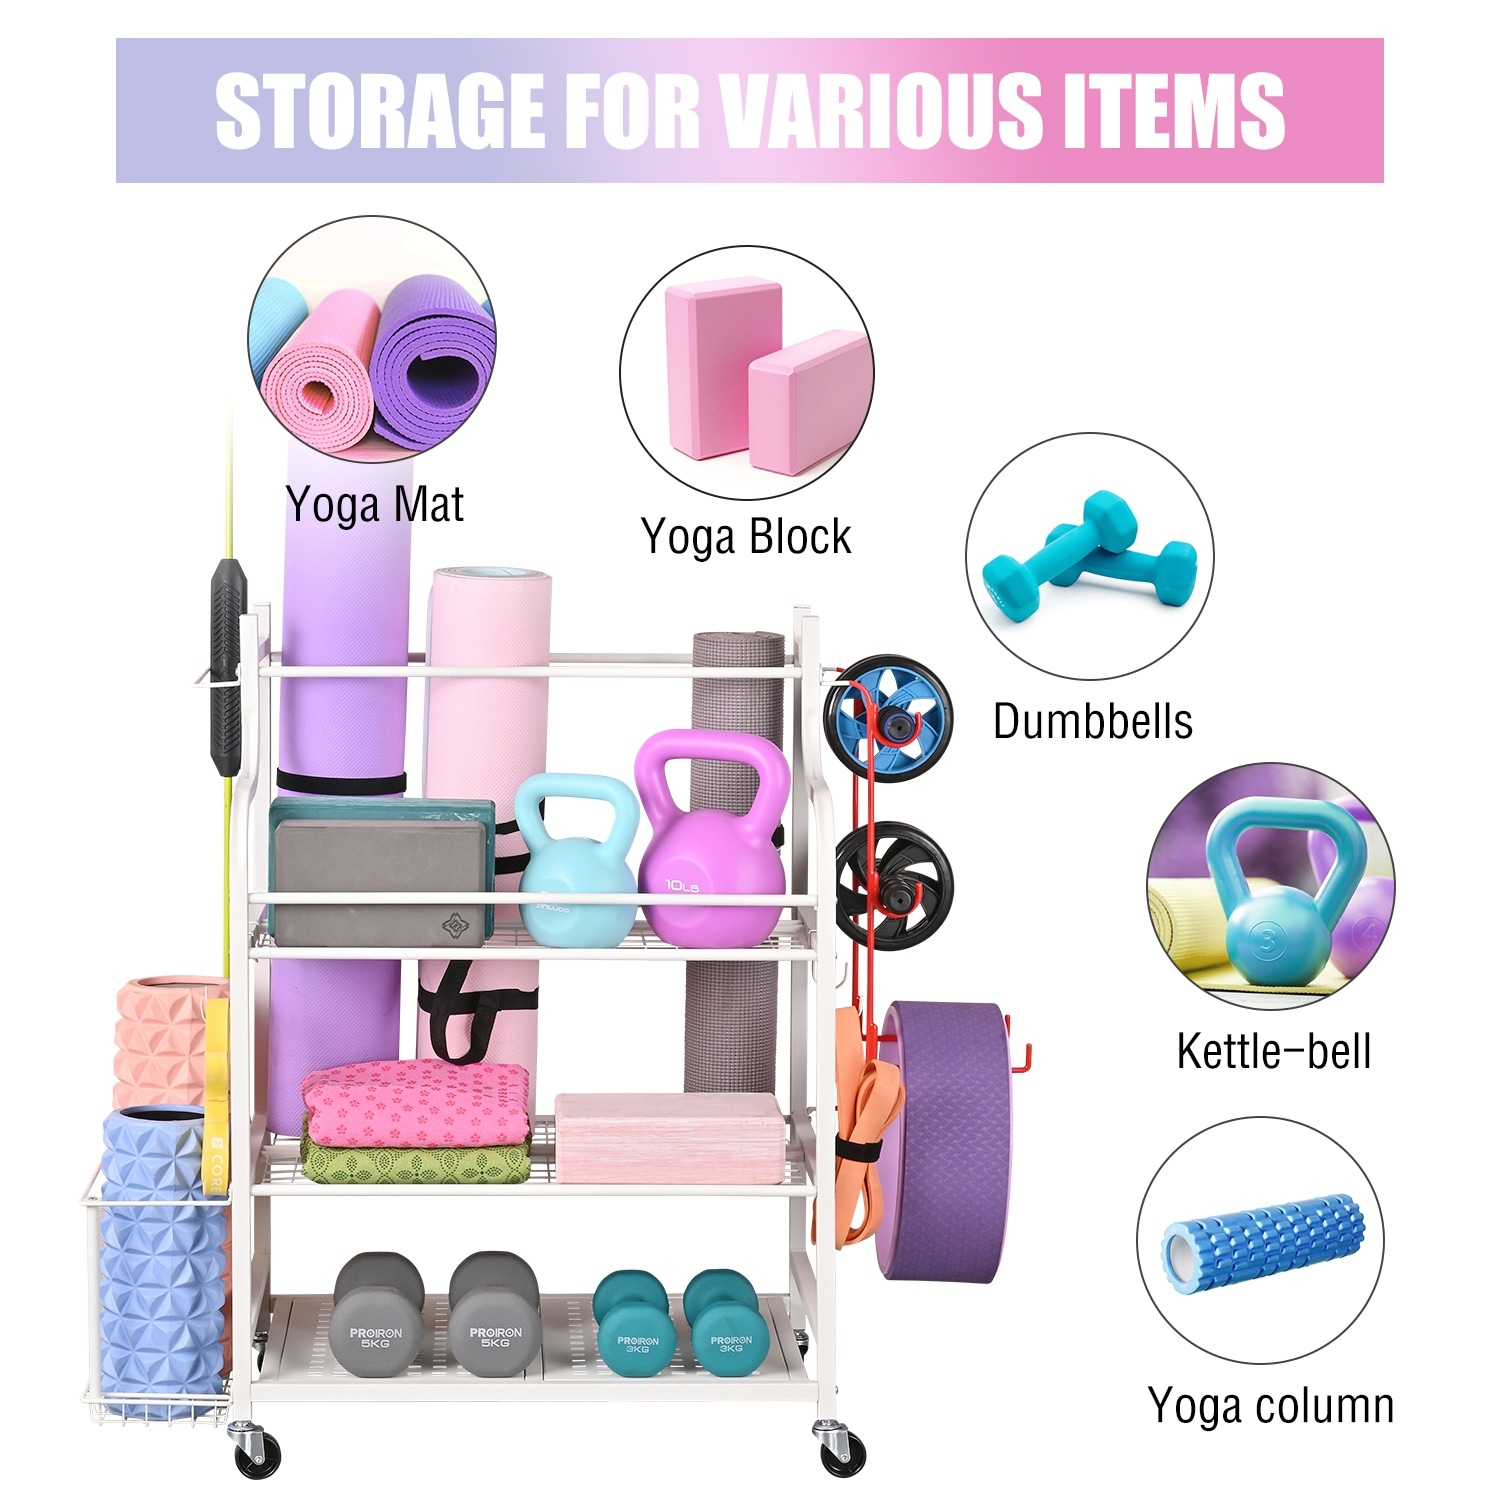 https://ak1.ostkcdn.com/images/products/is/images/direct/417c7274413a471f8f107afb2e283364053757e3/Yoga-Mat-Storage-Racks%2CHome-Gym-Storage-Rack-for-Dumbbells-Kettlebells-Foam-Roller%2C-Workout-Equipment-Storage-Organizer.jpg